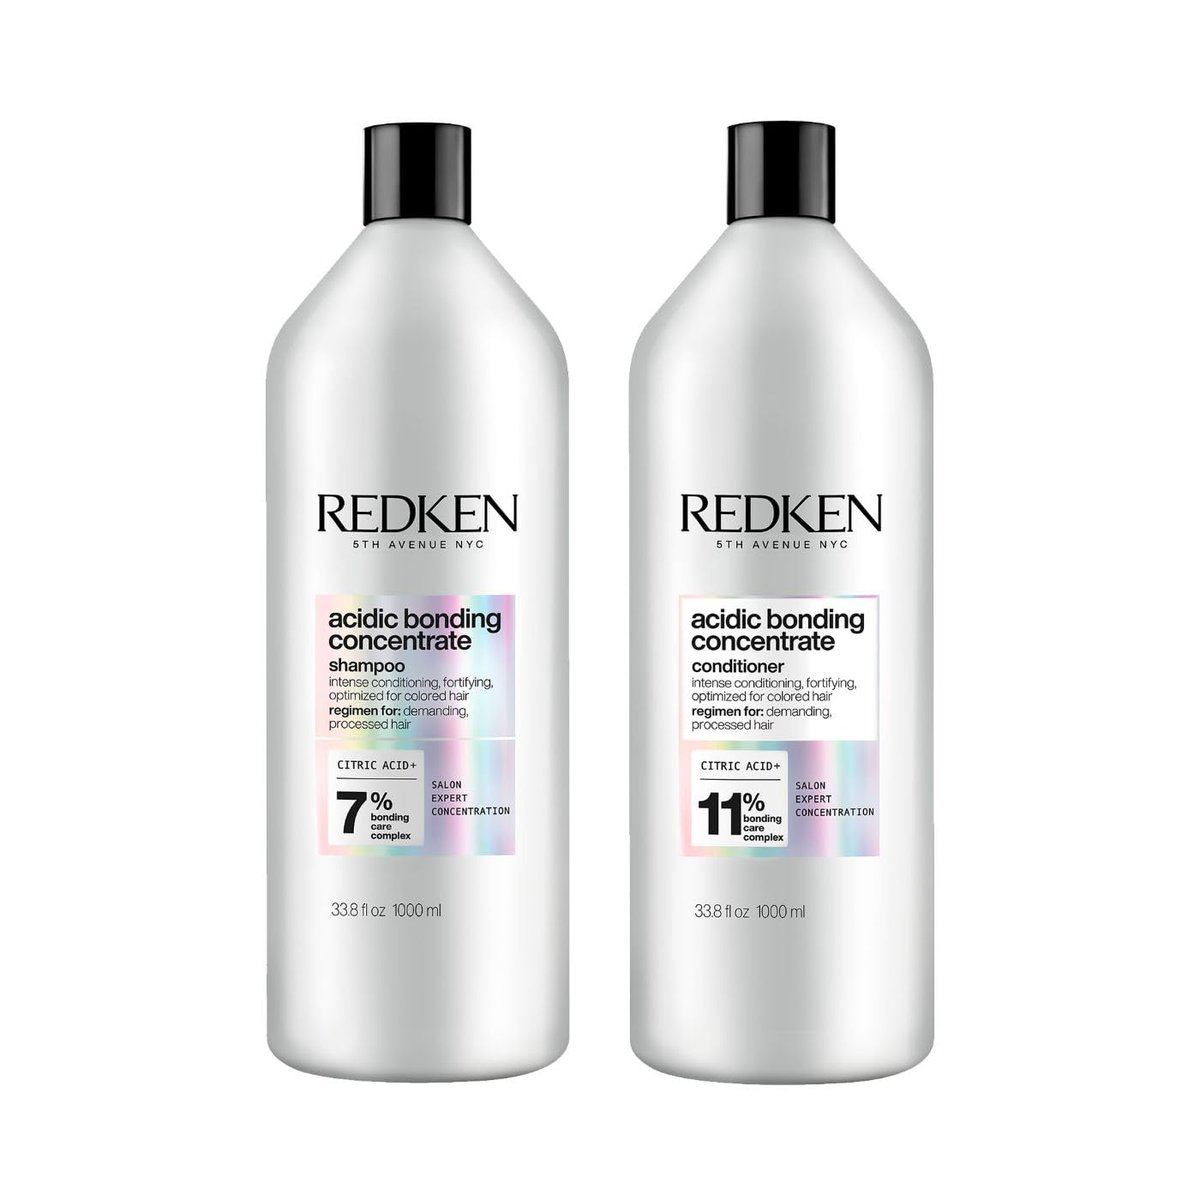 REDKEN Shampoo and Conditioner Set (1L), Acidic Bonding Concentrate for Damaged Hair is $73.47(38% OFF) on Amazon amzn.to/4bePnla #ad